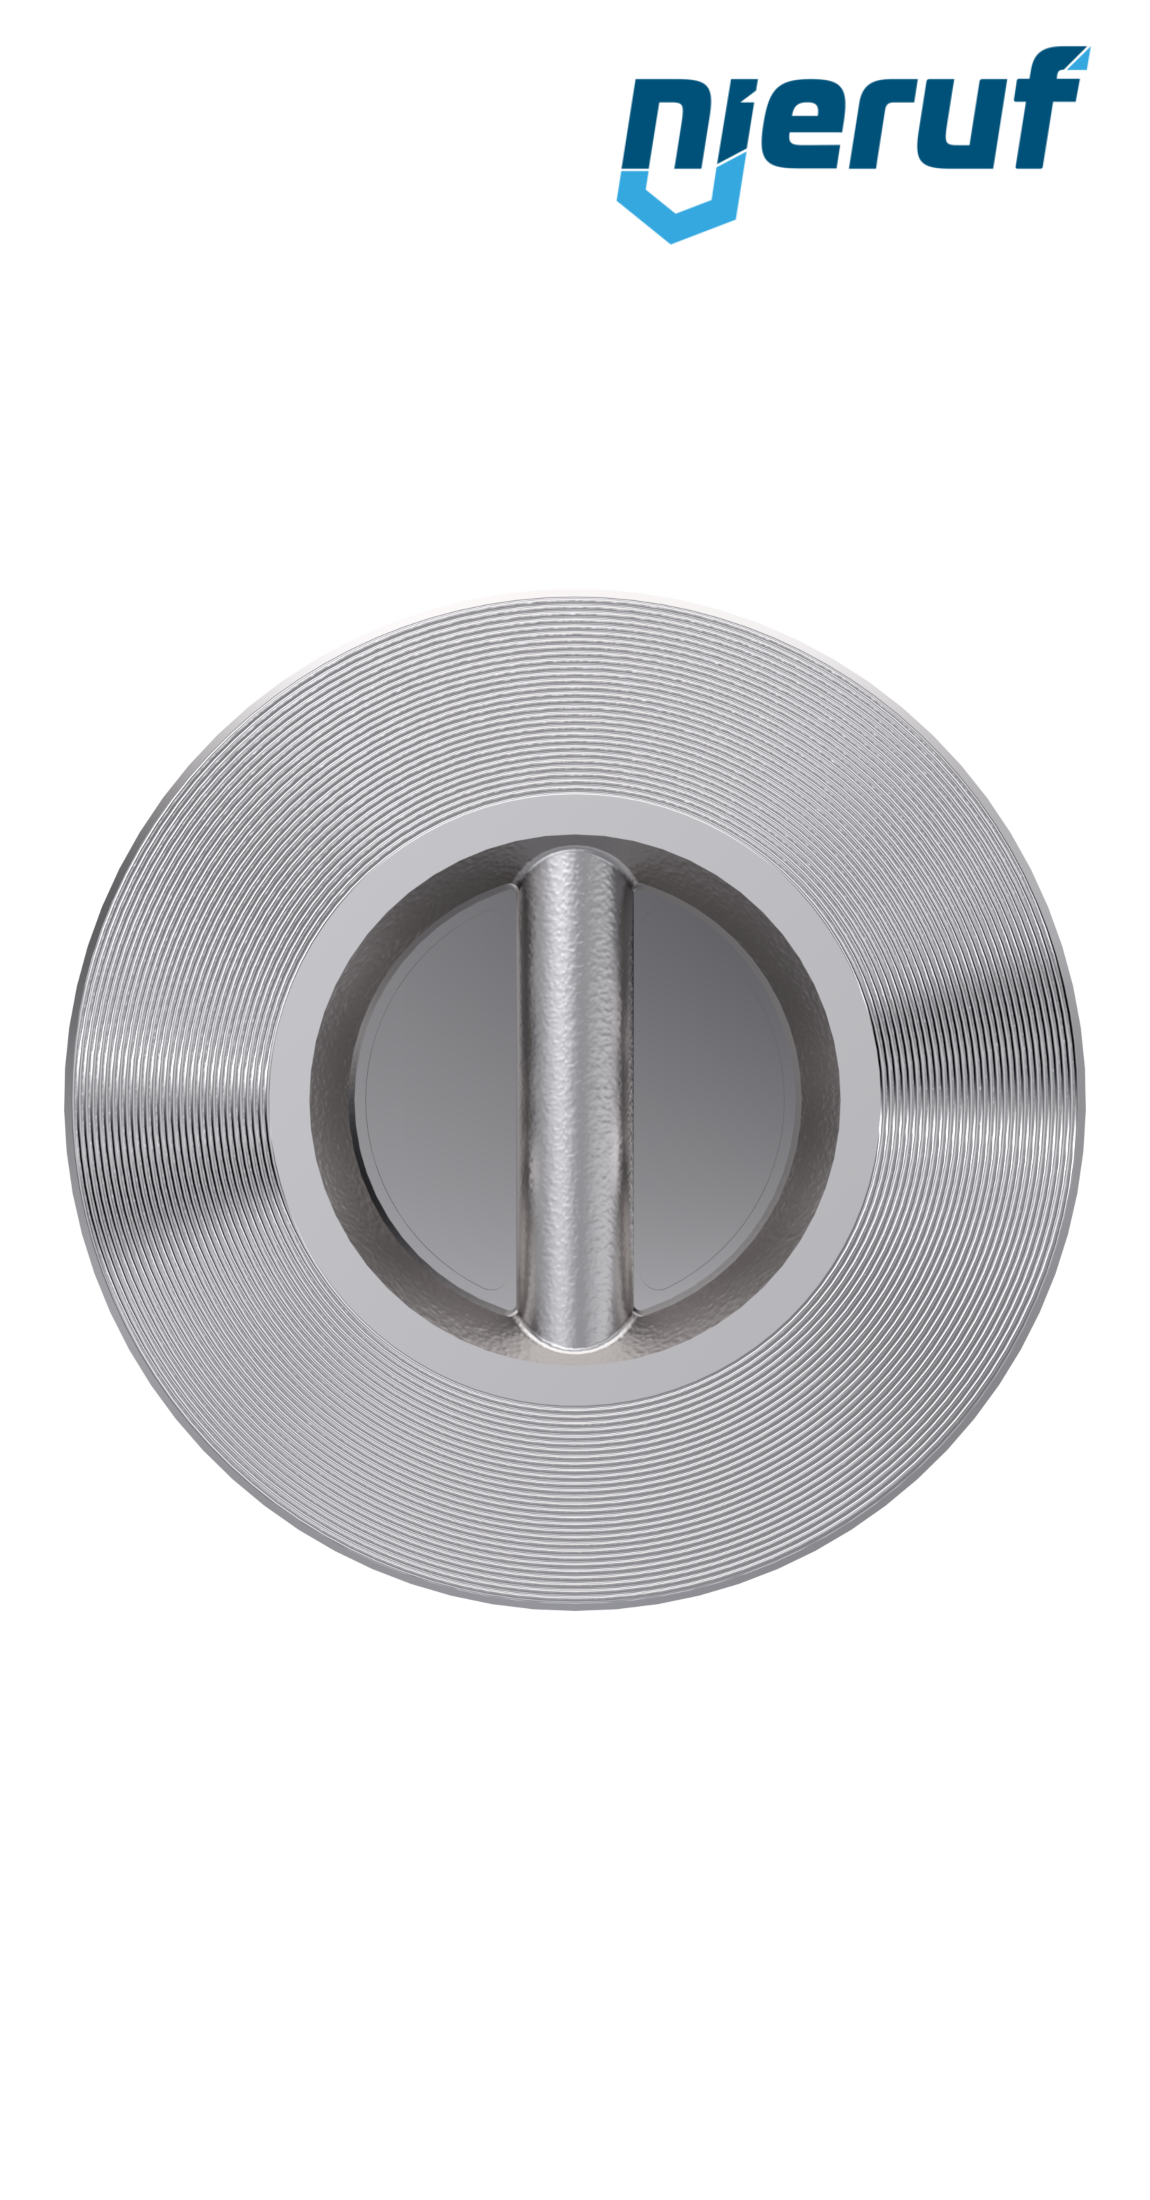 dual plate check valve DN125 DR03 stainless steel 1.4408 metal